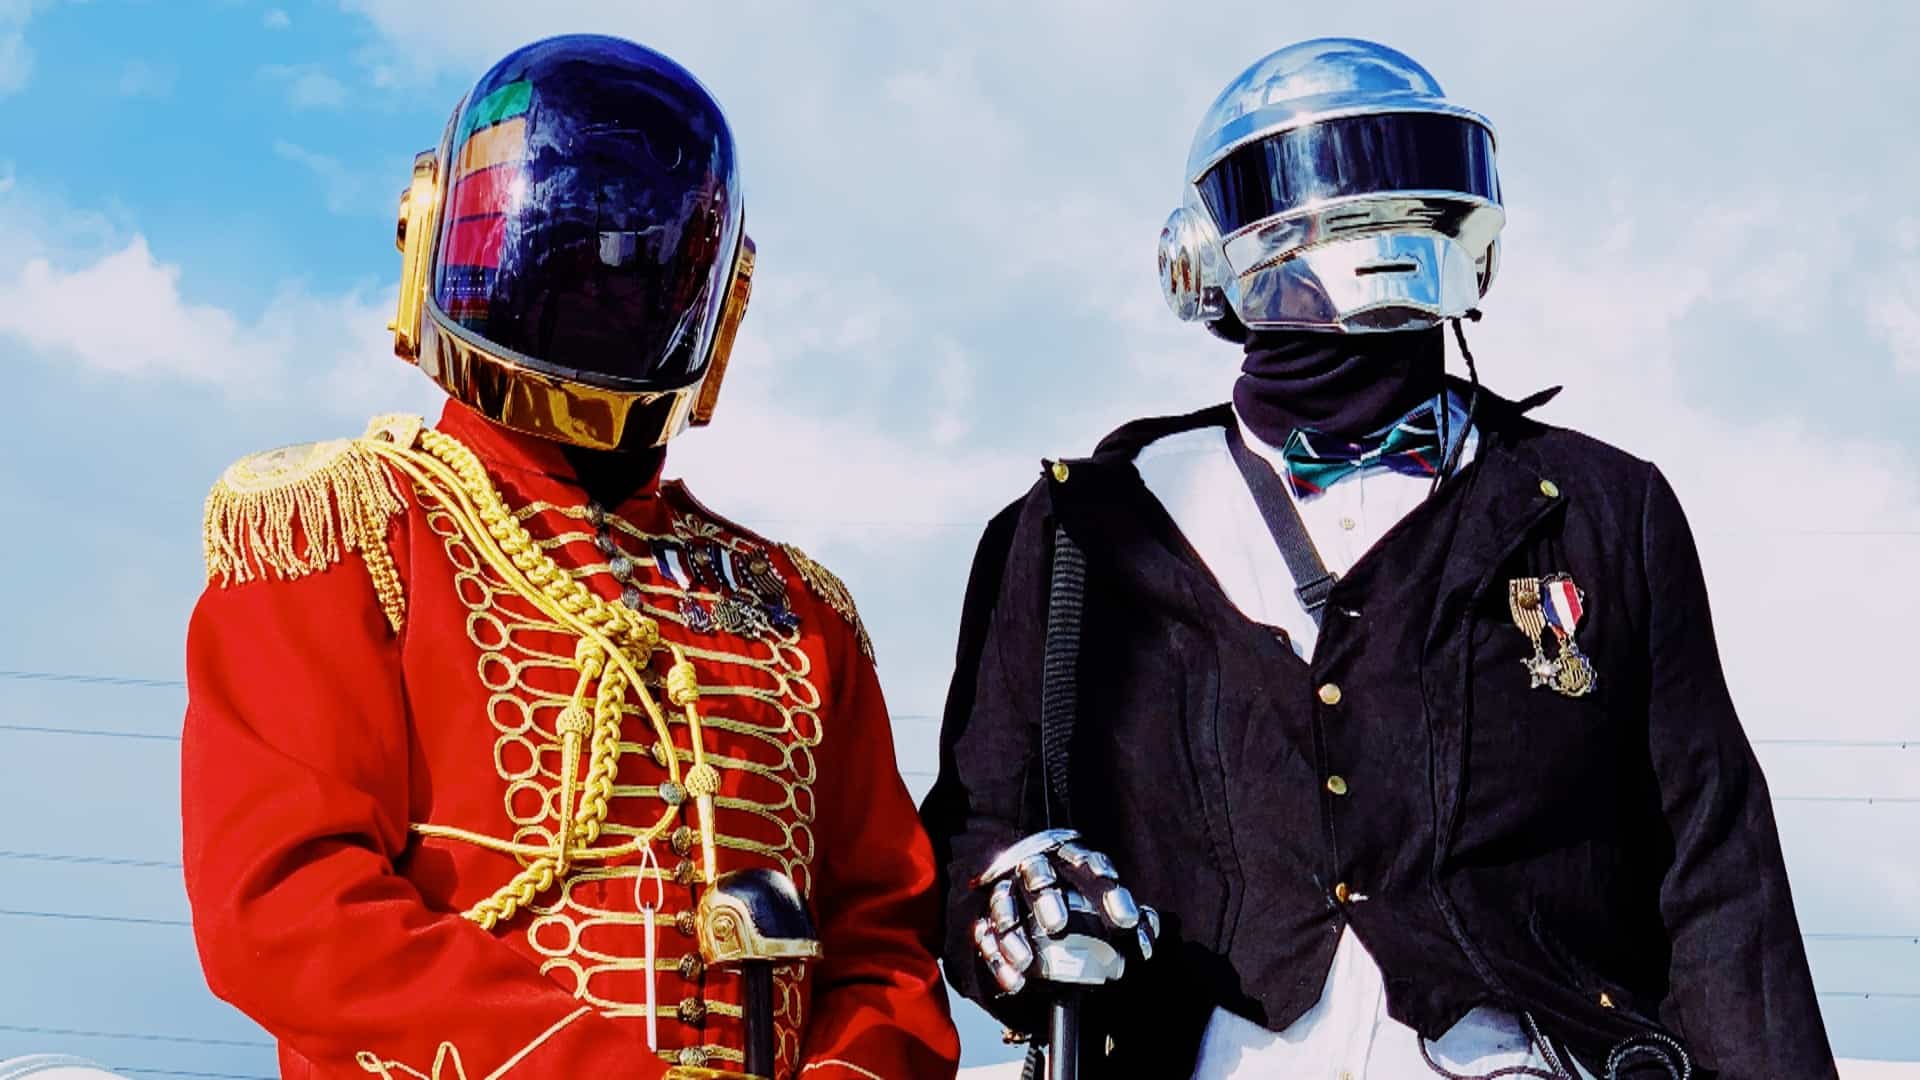 Daft Punk classic ‘Harder, Better, Faster, Stronger’ turns 19 years old